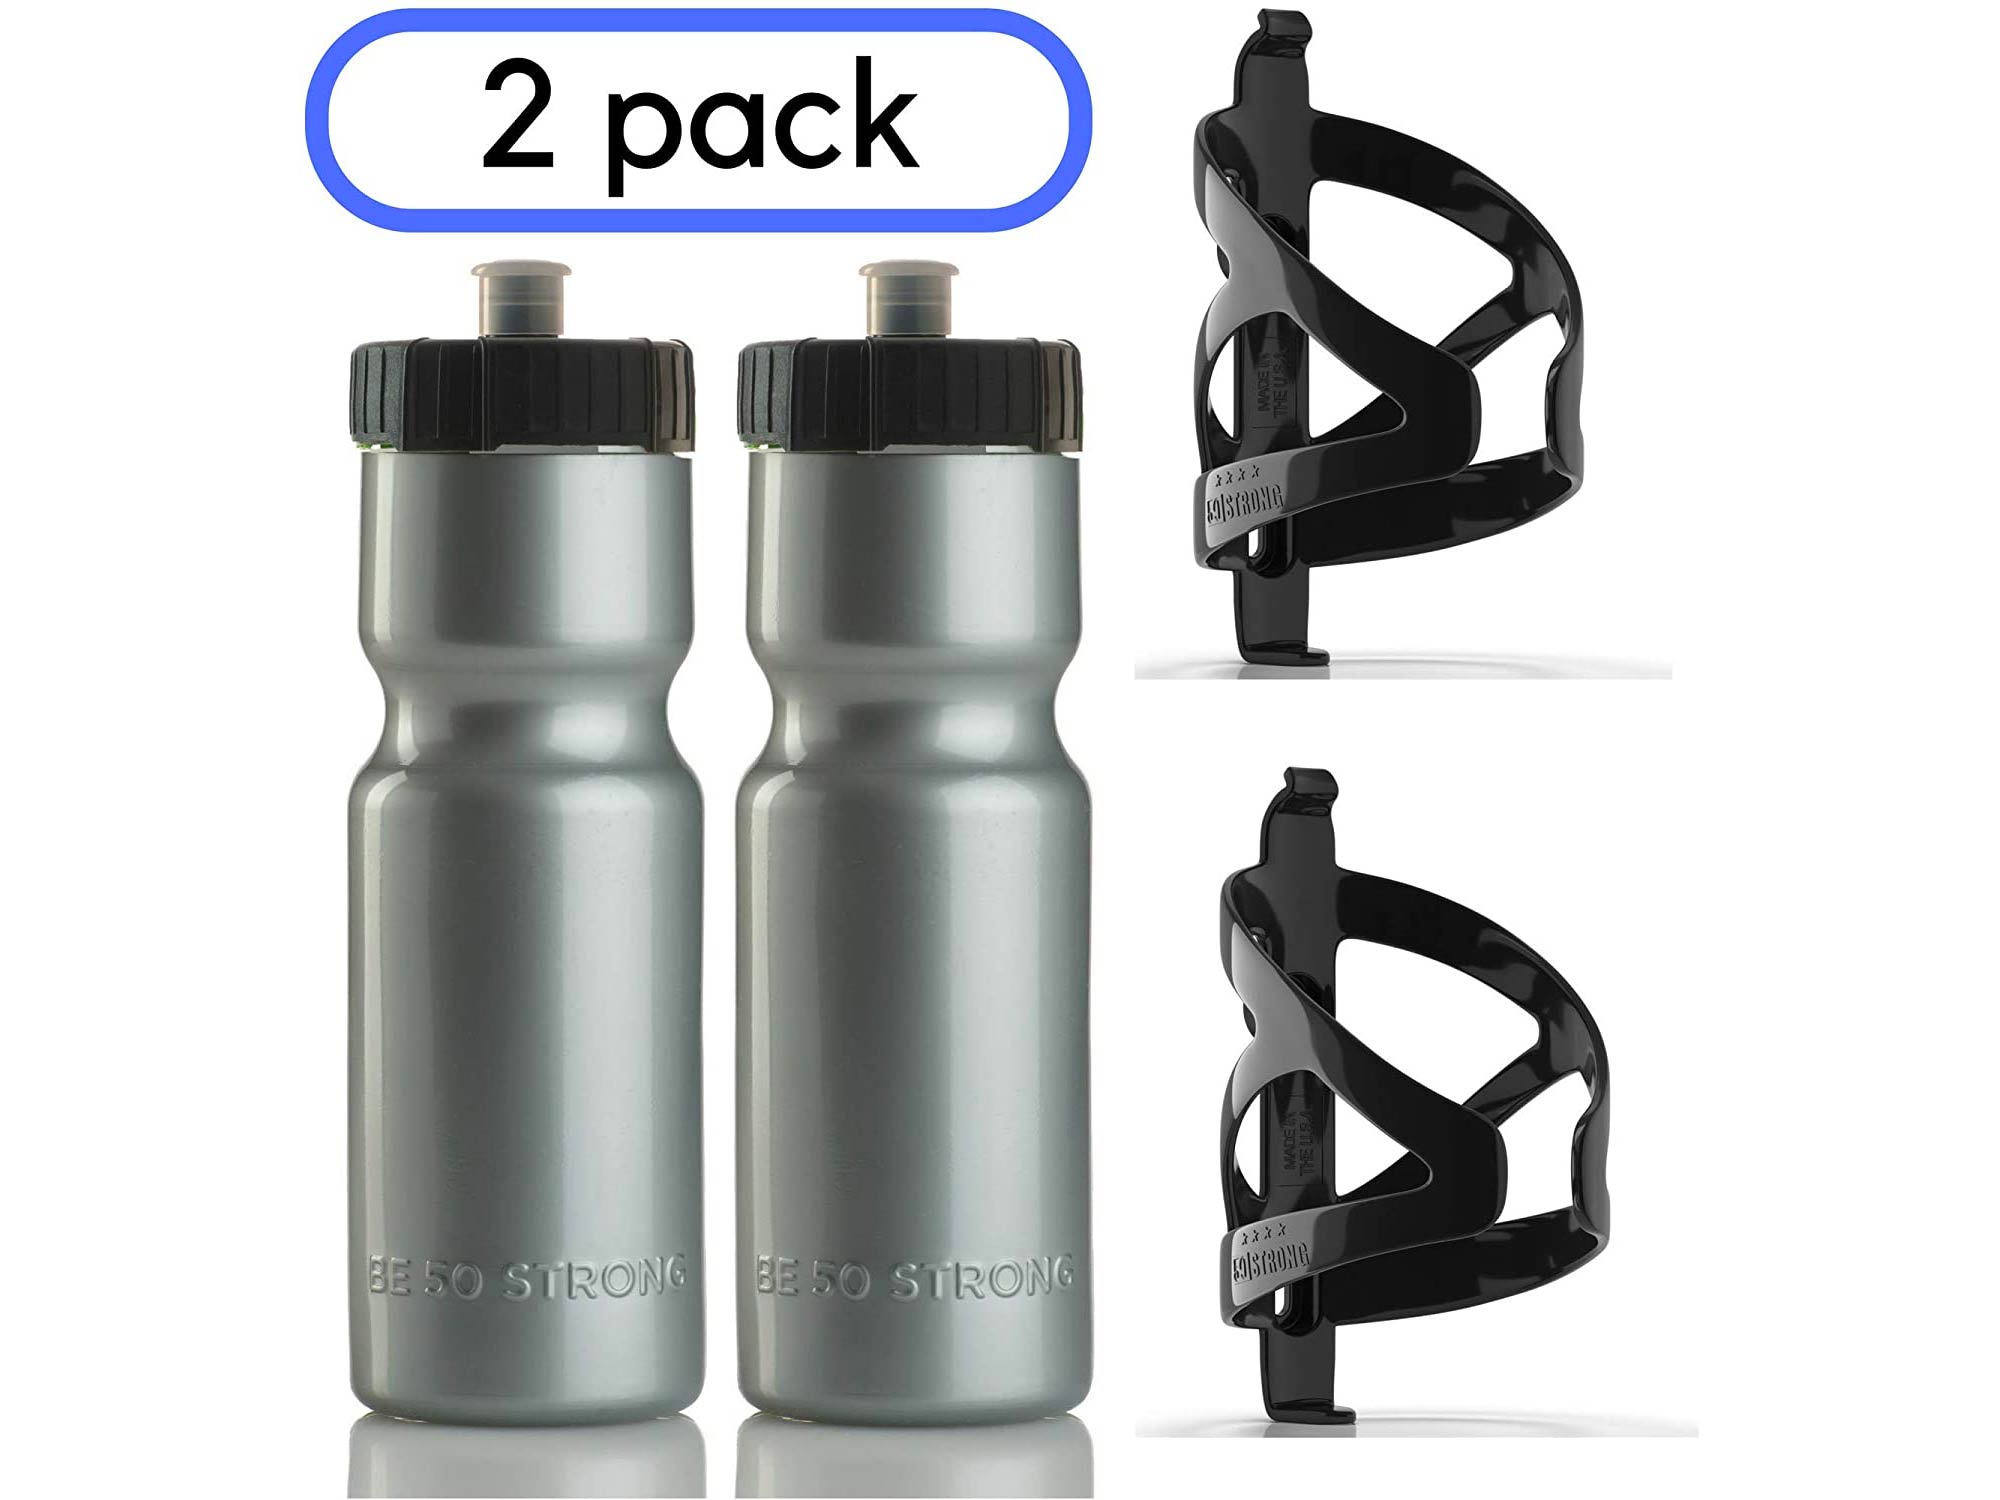 50 Strong Bike Bottle Holder with Water Bottle - 2 Pack - 22 oz. BPA Free Bicycle Squeeze Bottle and Durable Plastic Holder Cage- Made in USA